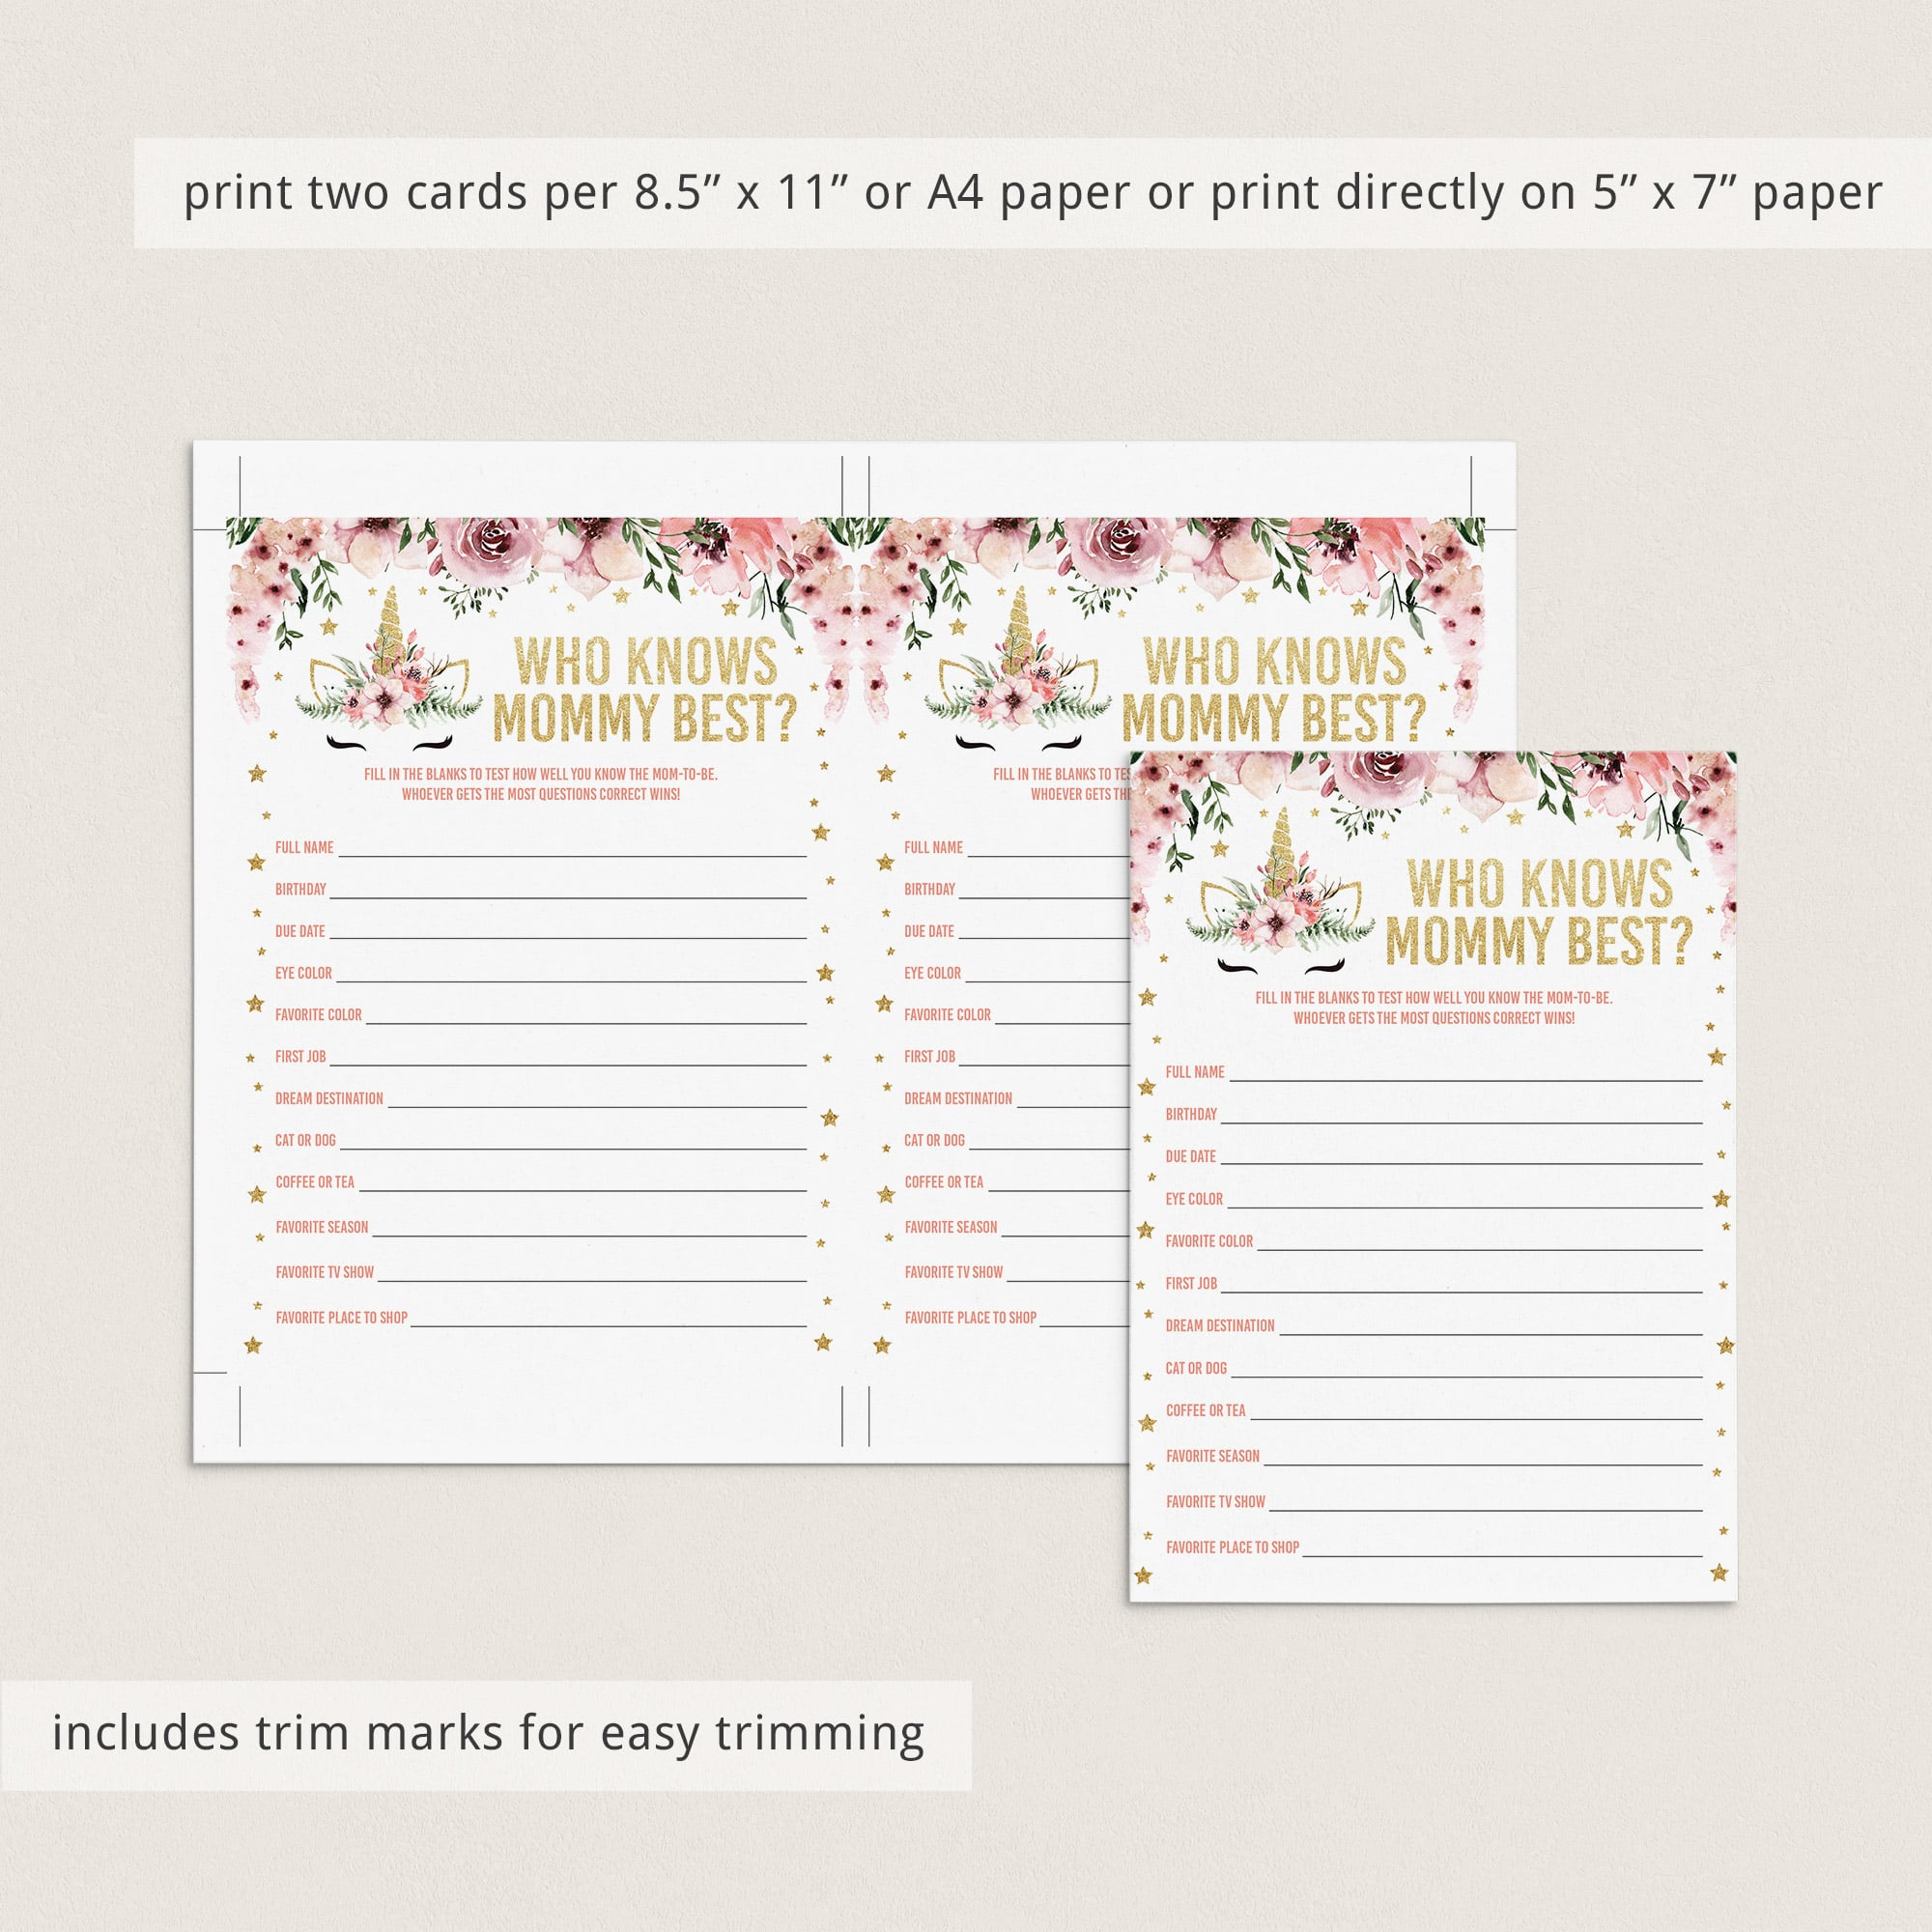 Who knows mommy best quiz game cards printable for girl unicorn baby shower by LittleSizzle